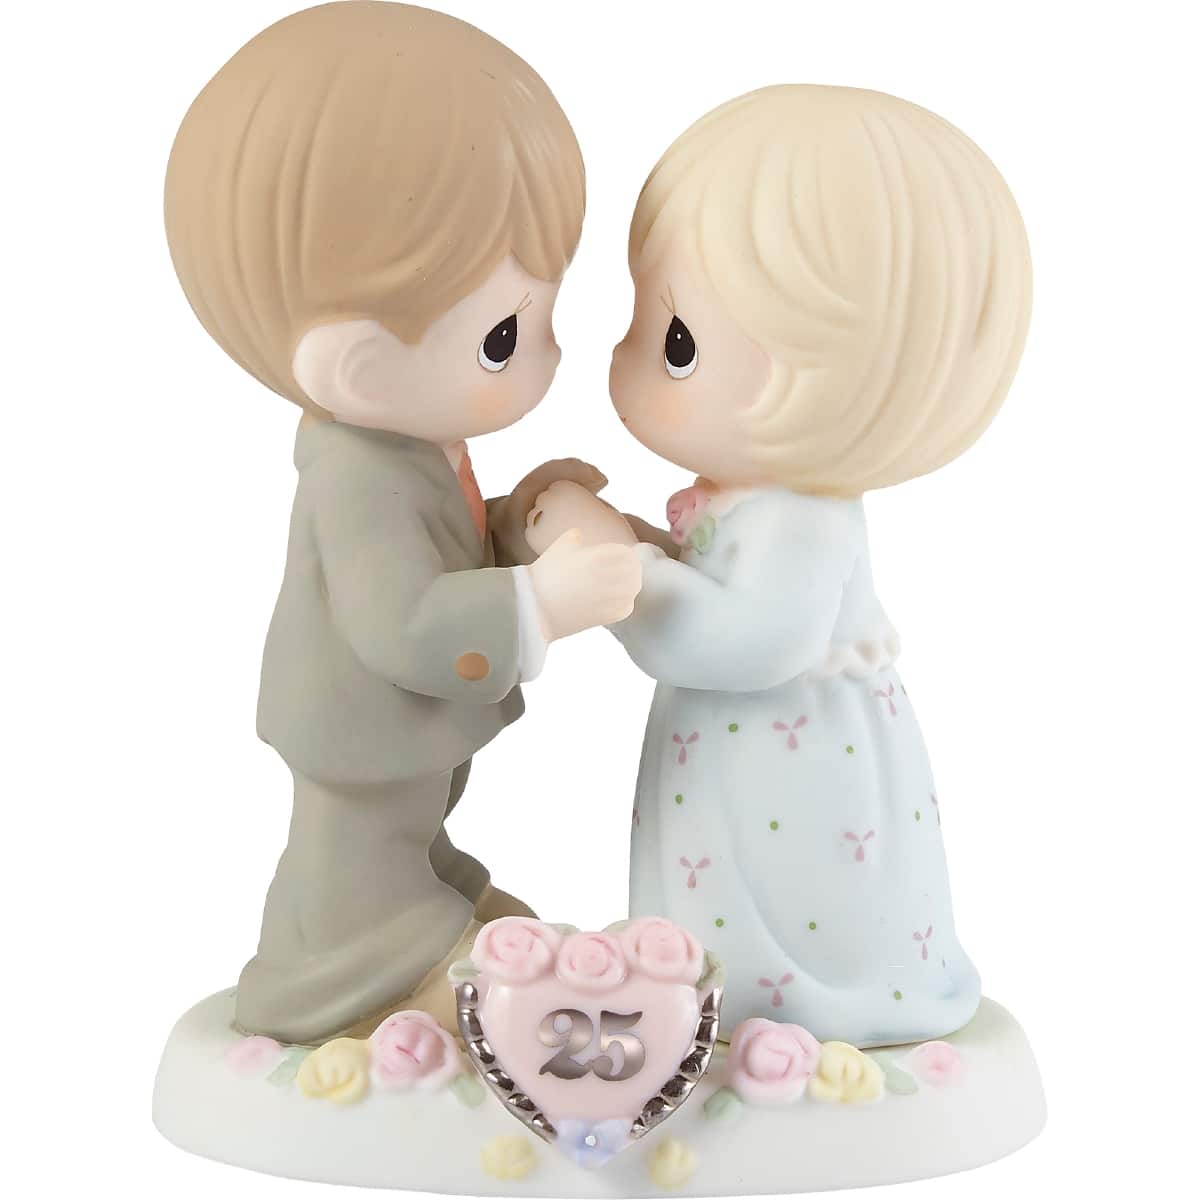 Precious Moments Our Love Still Sparkles In Your Eyes 25th Anniversary Bisque Porcelain Figurine